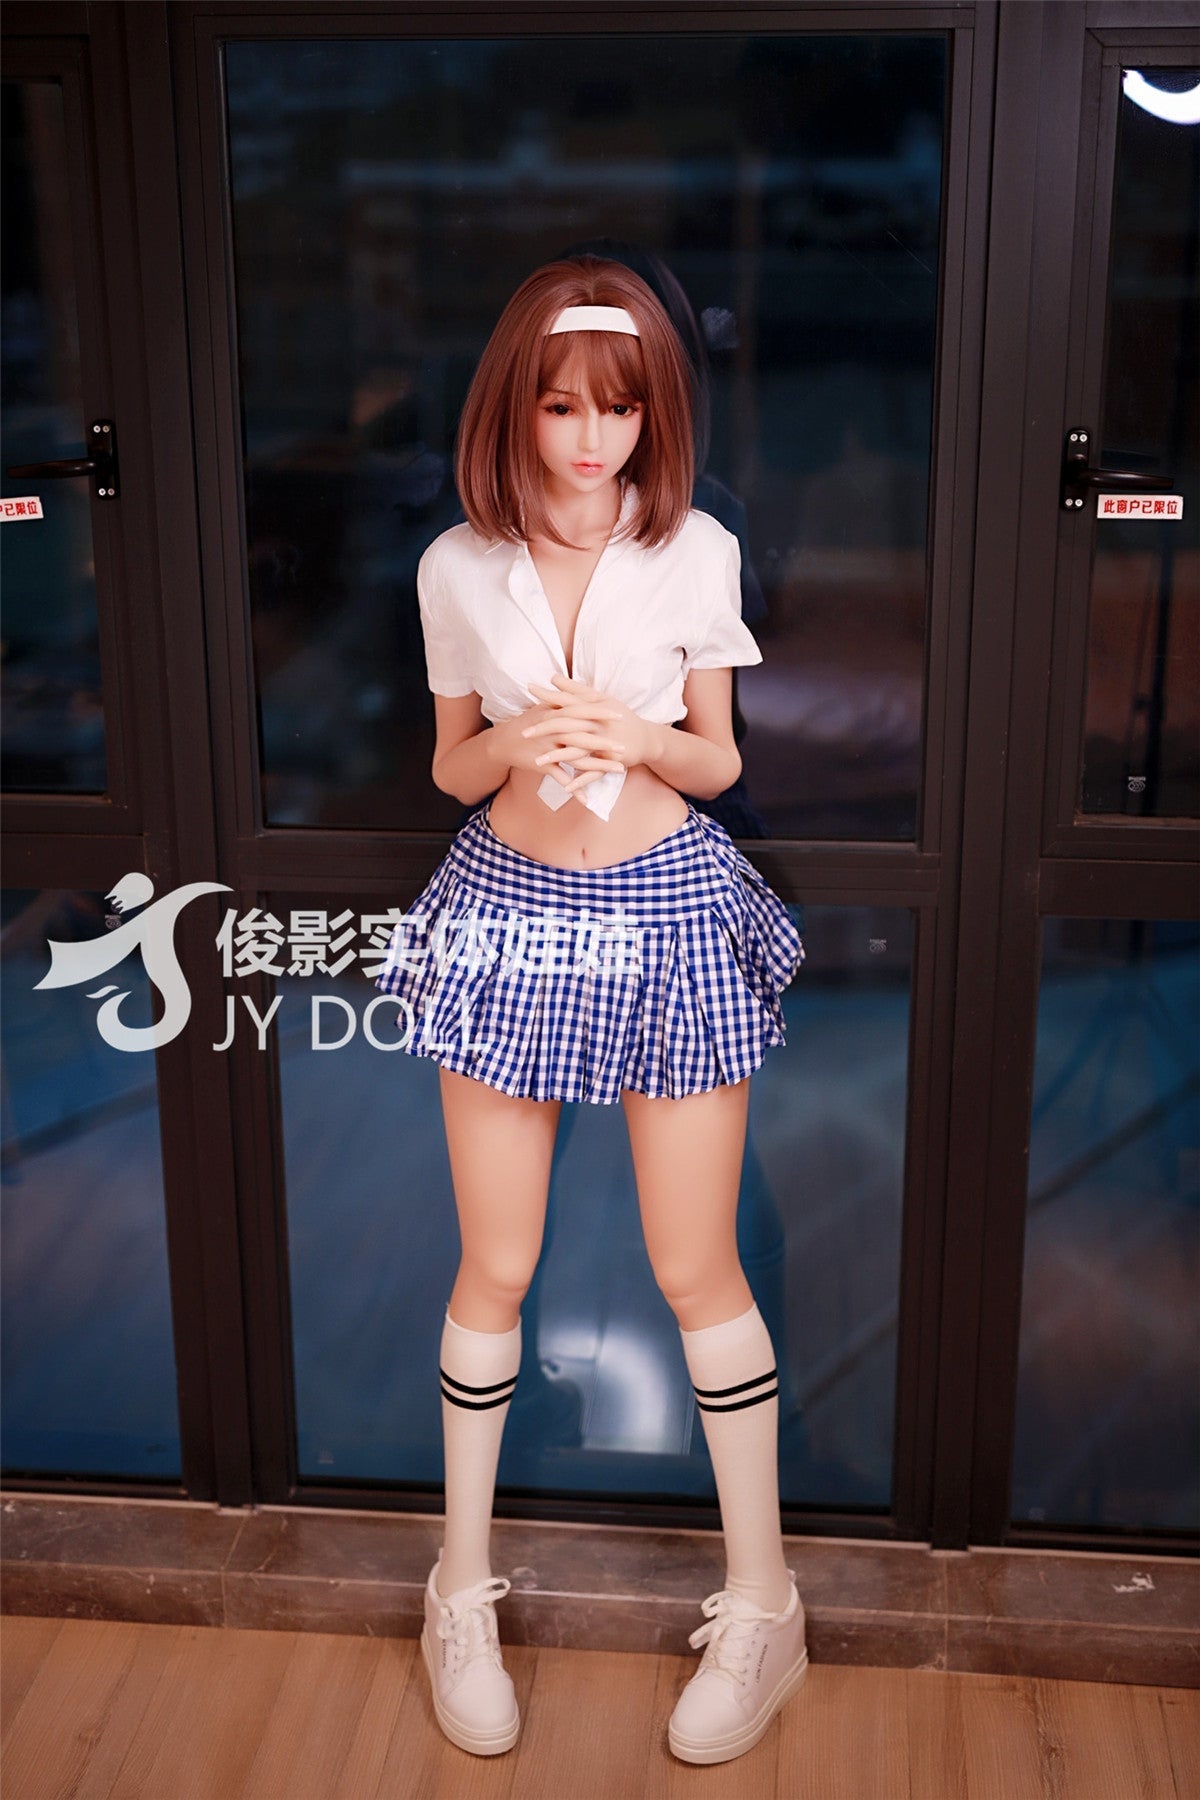 JY Doll 157 cm TPE - Moon | Buy Sex Dolls at DOLLS ACTUALLY